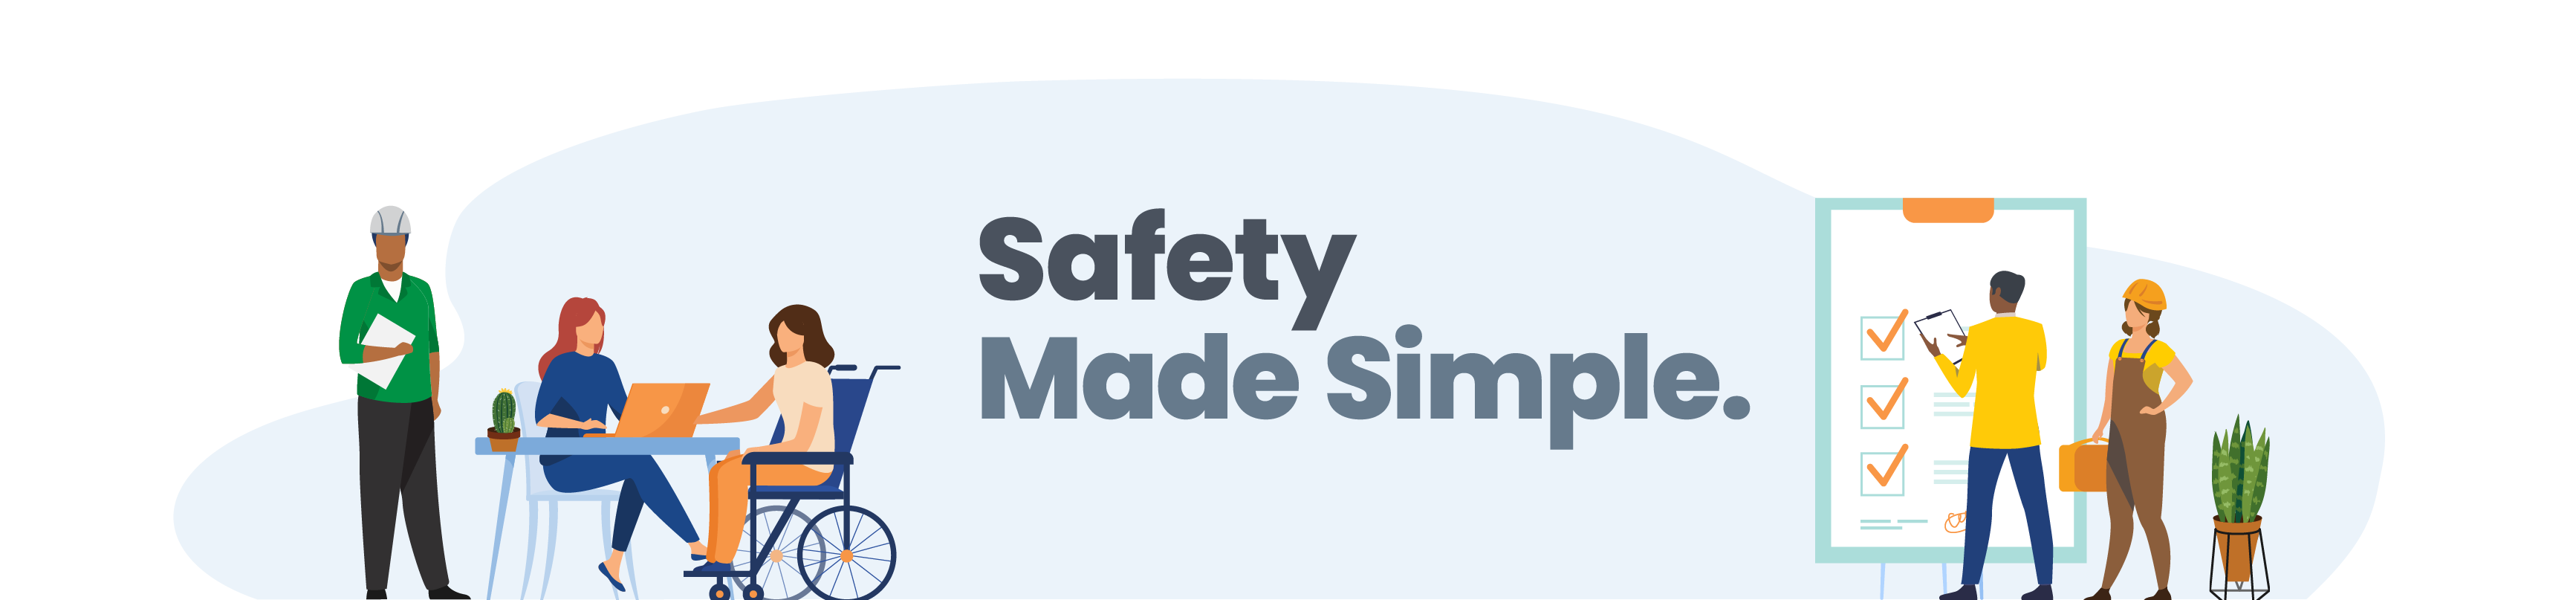 Safety made simple.